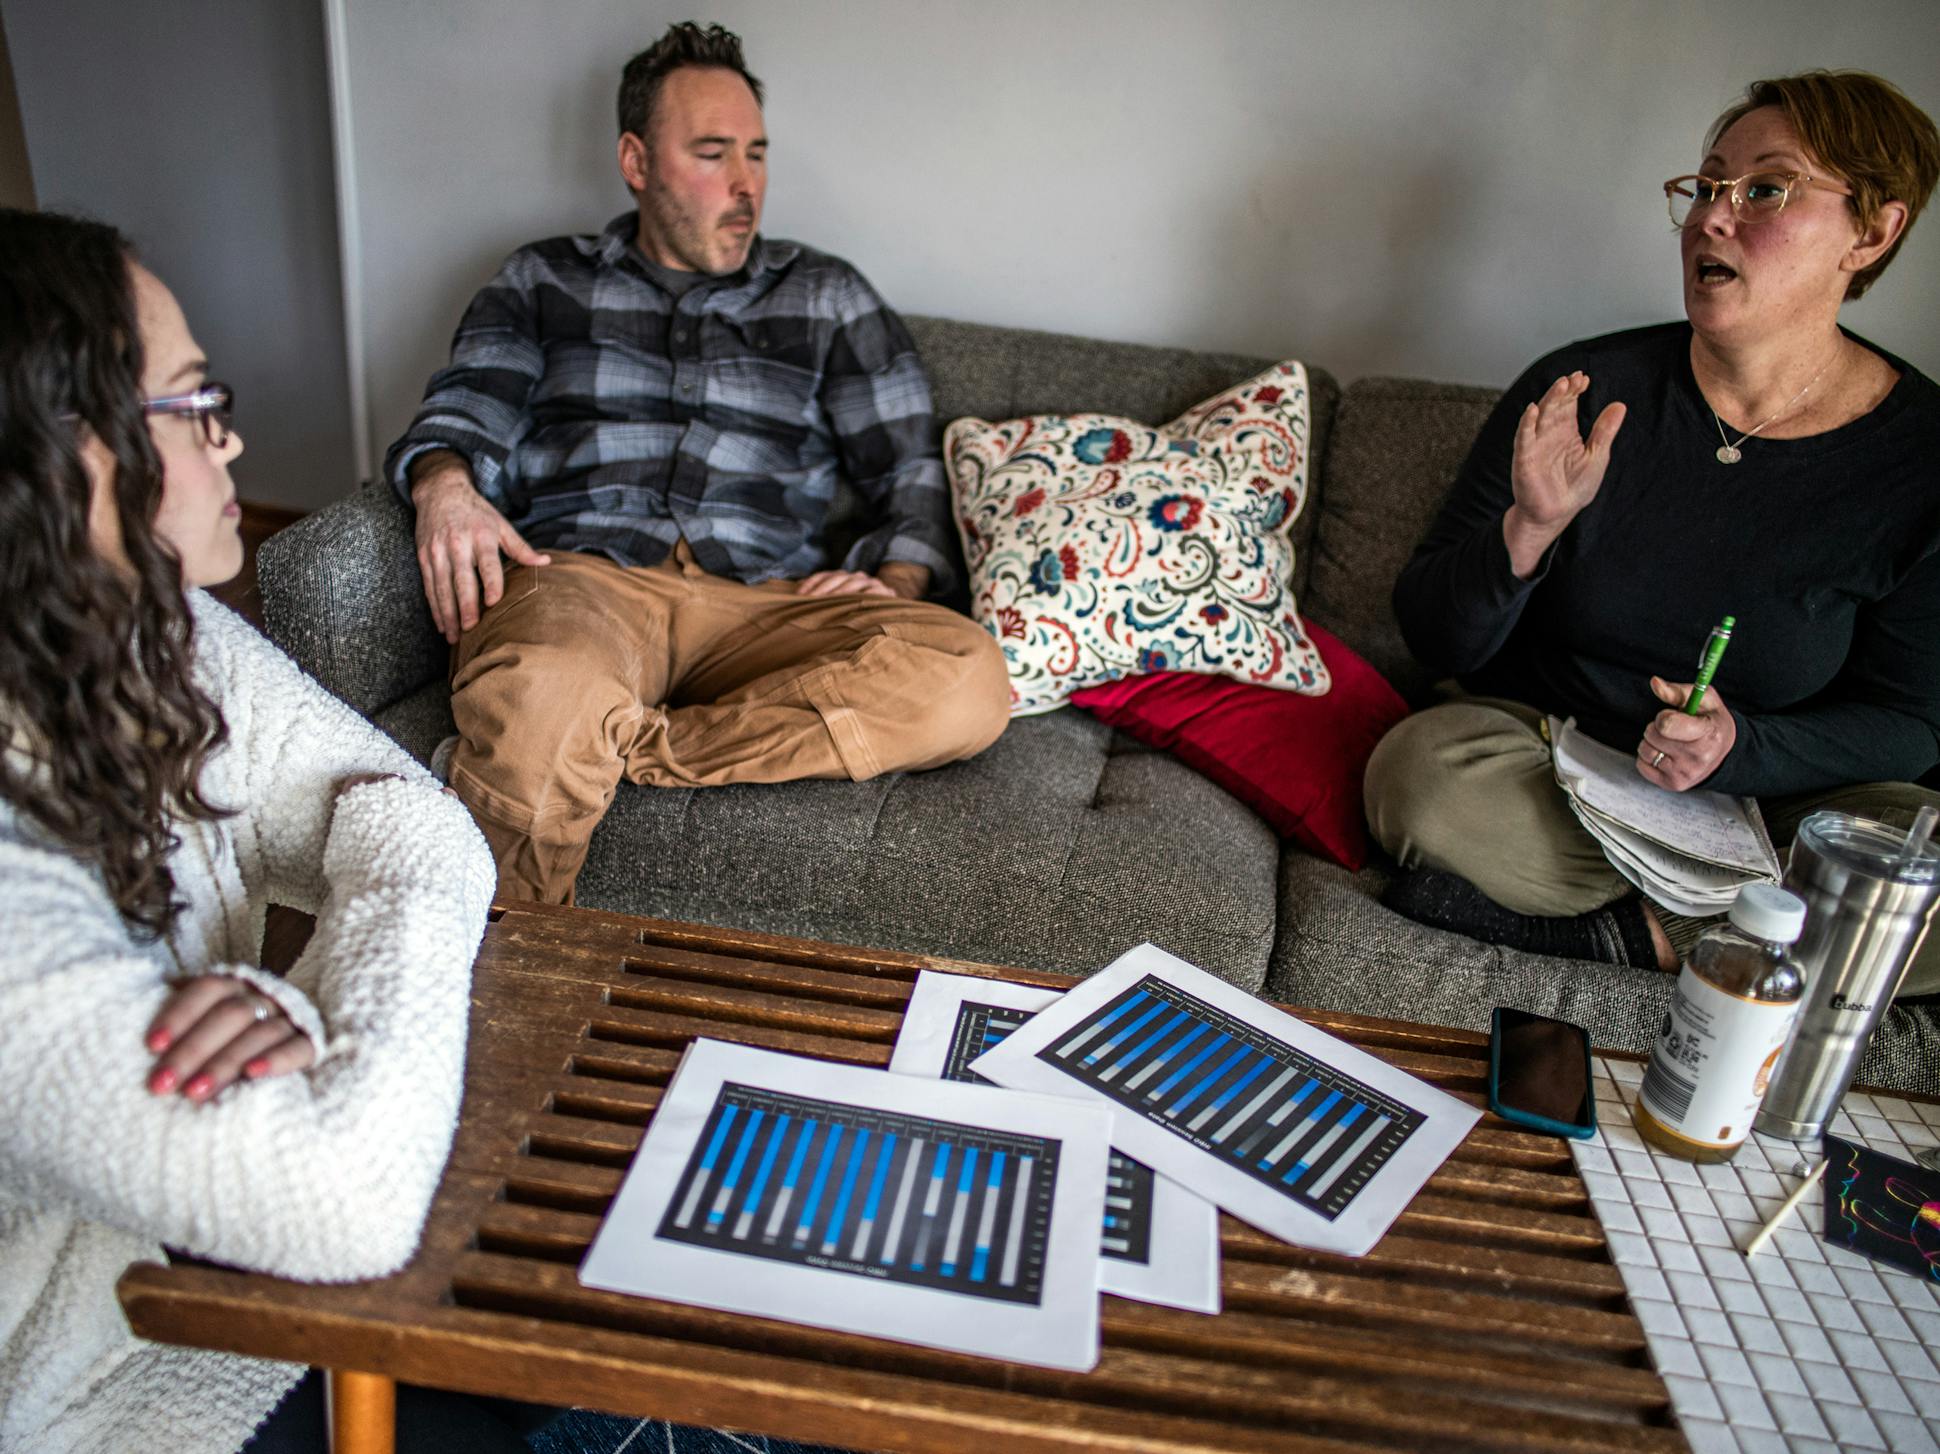 Behavior analyst Randal Westergard, left, discussed Harrison's progress with his parents at their home in West St. Paul. At-home care has helped him thrive.